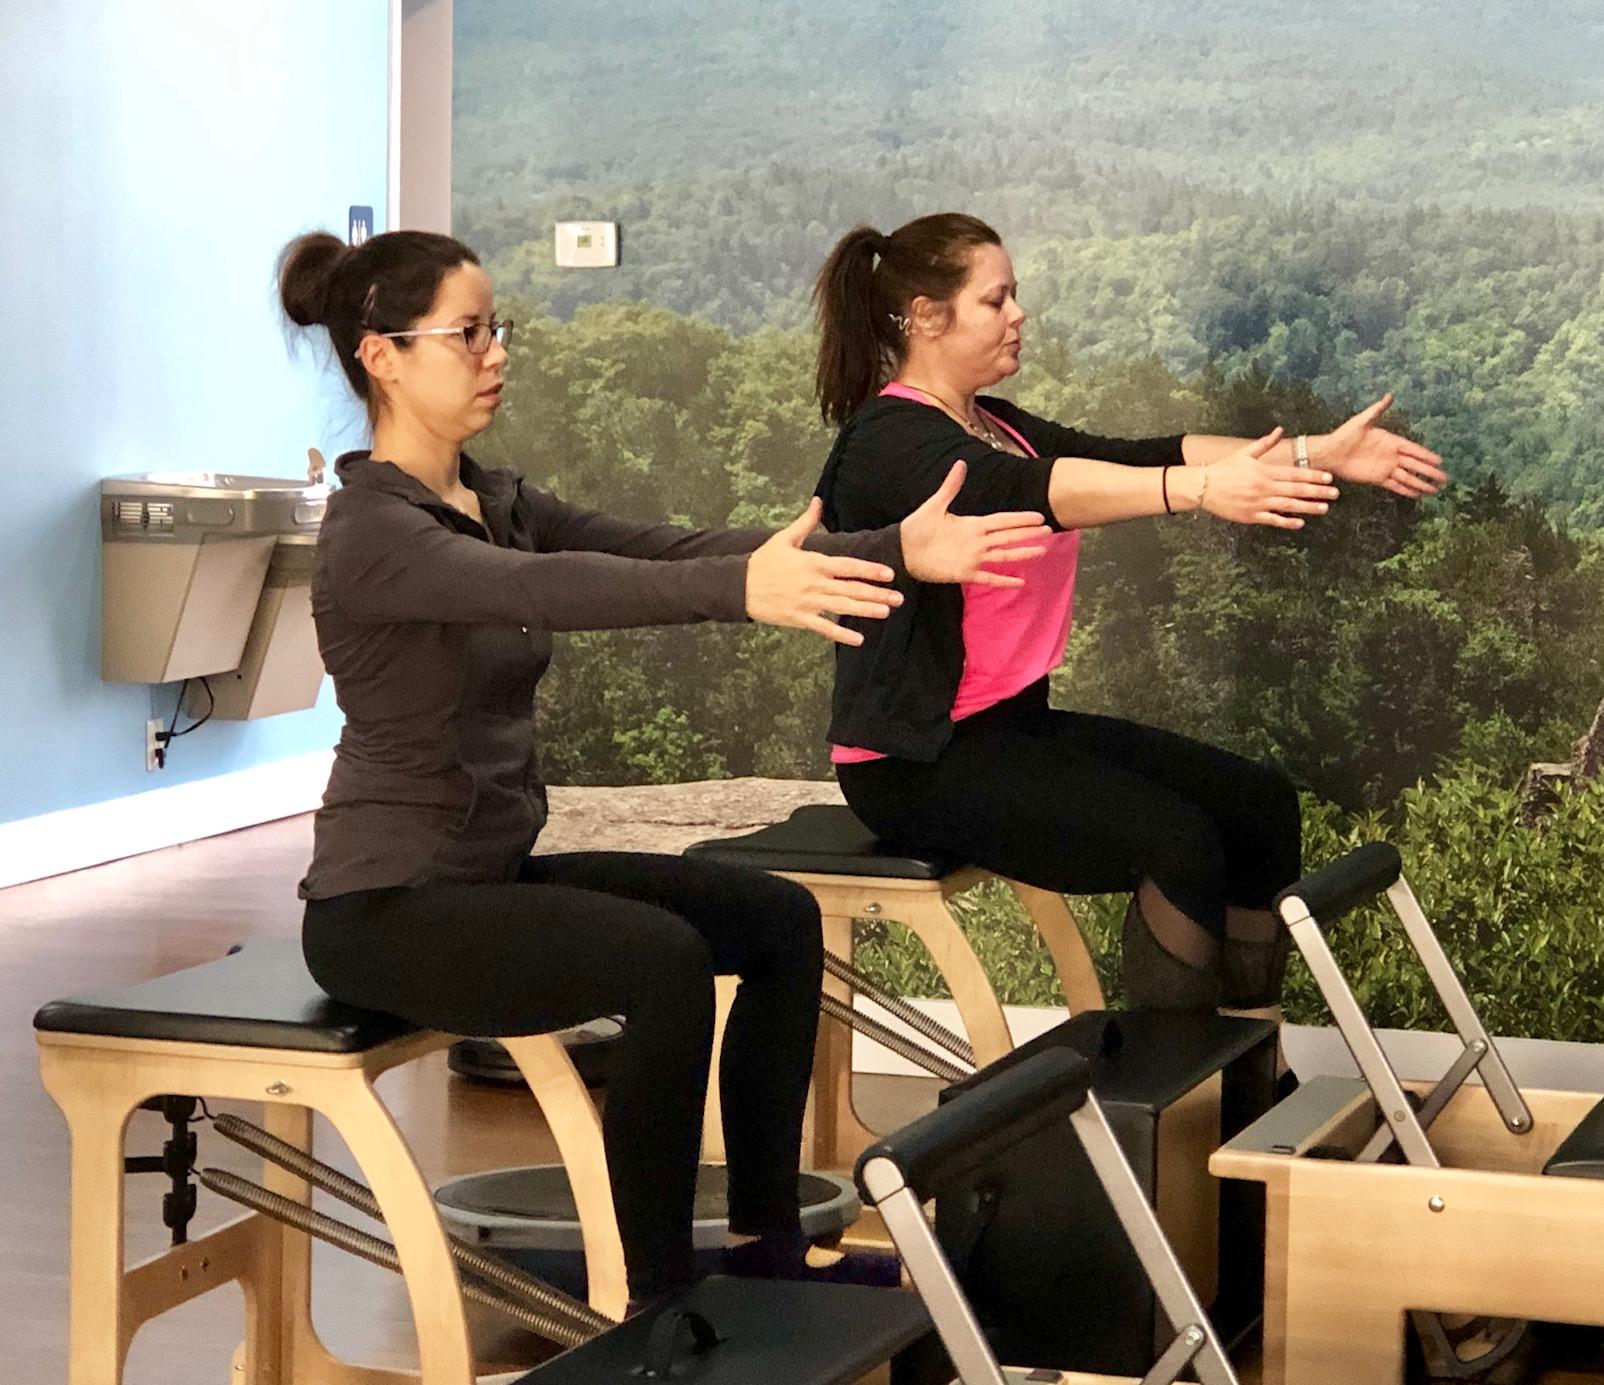 Chair work in our Reformer Flow Level 2.0 class